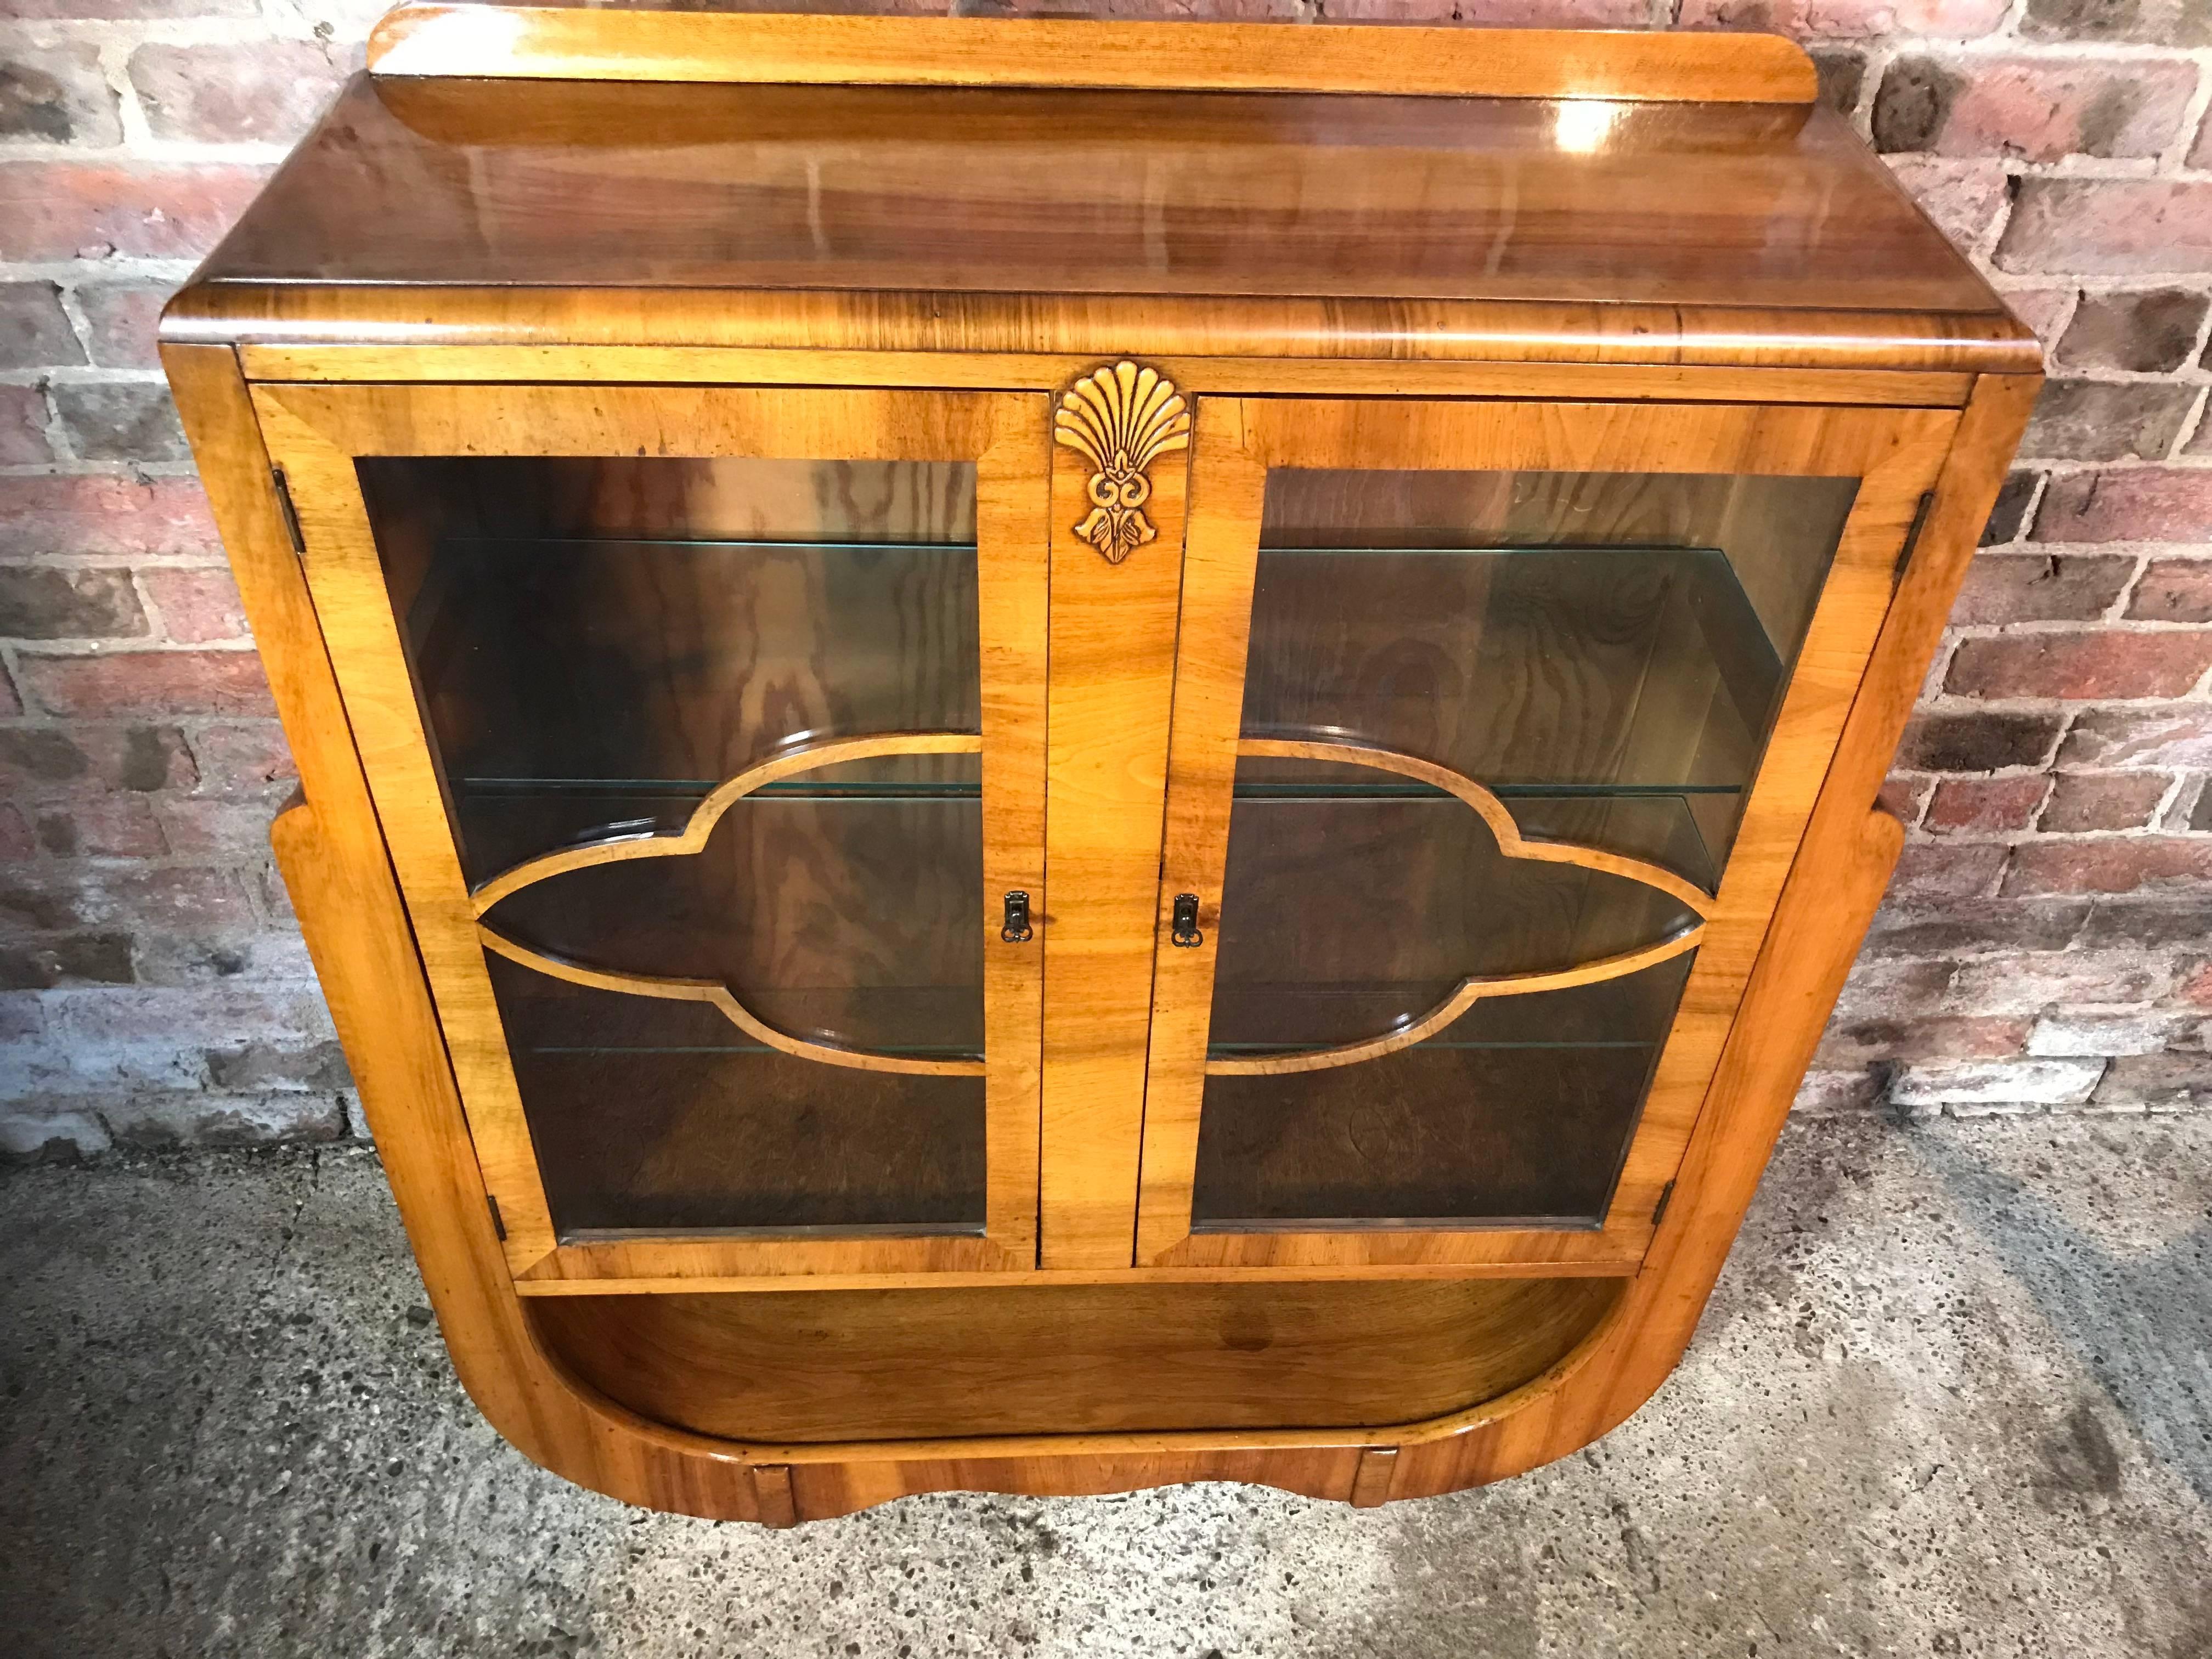 British Large English 1930 Art Deco Walnut Display Cabinet in Mint Condition